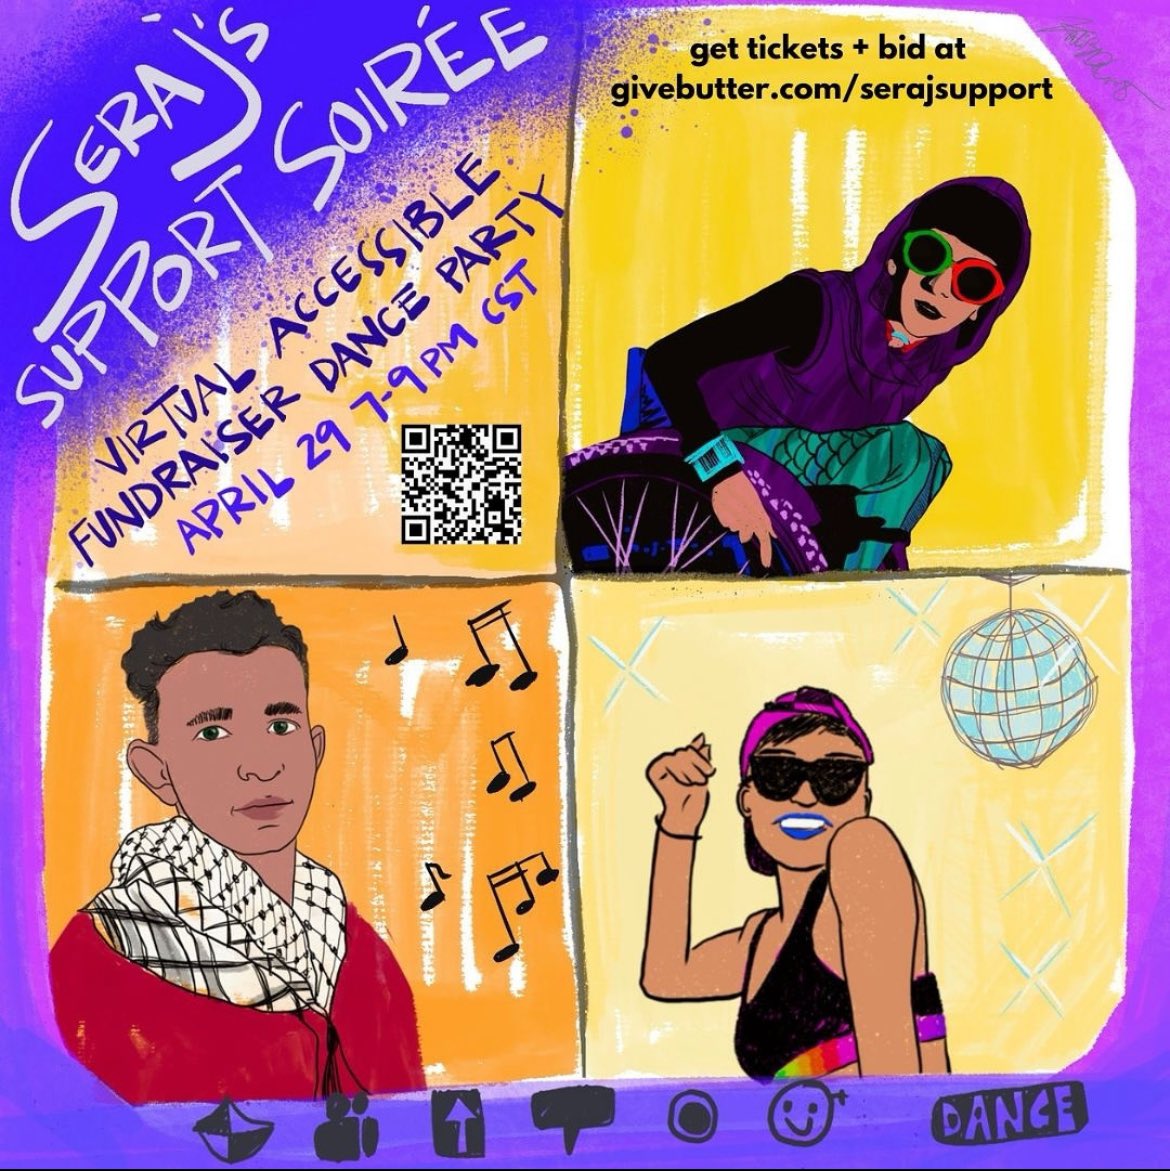 hello, m friend sky is organizing a virtual party and fundraiser on 4/29 for seraj – a palestinian youth who is seeking an emergency evacuation for his family past funds have helped provide food, water, electricity, and internet access to people in rafah plz share + support